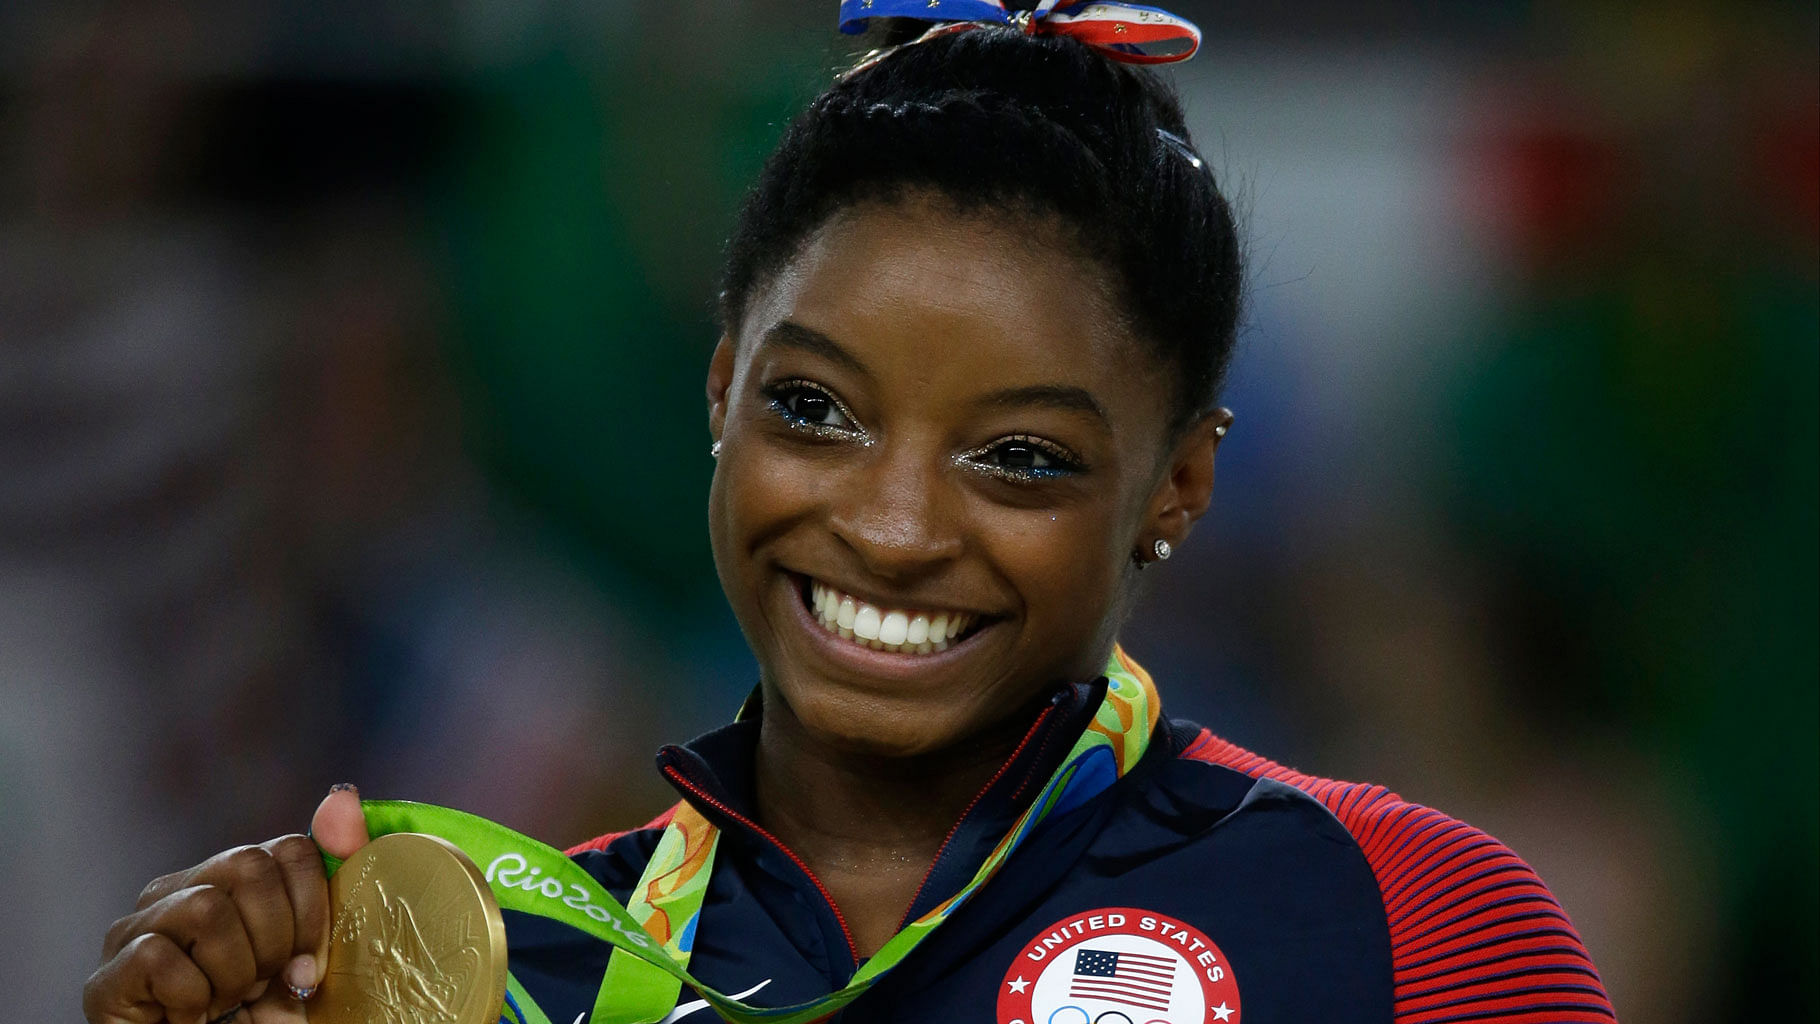 Simone Biles has said she was sexually abused by former USA Gymnastics team physician Larry Nassar.&nbsp;